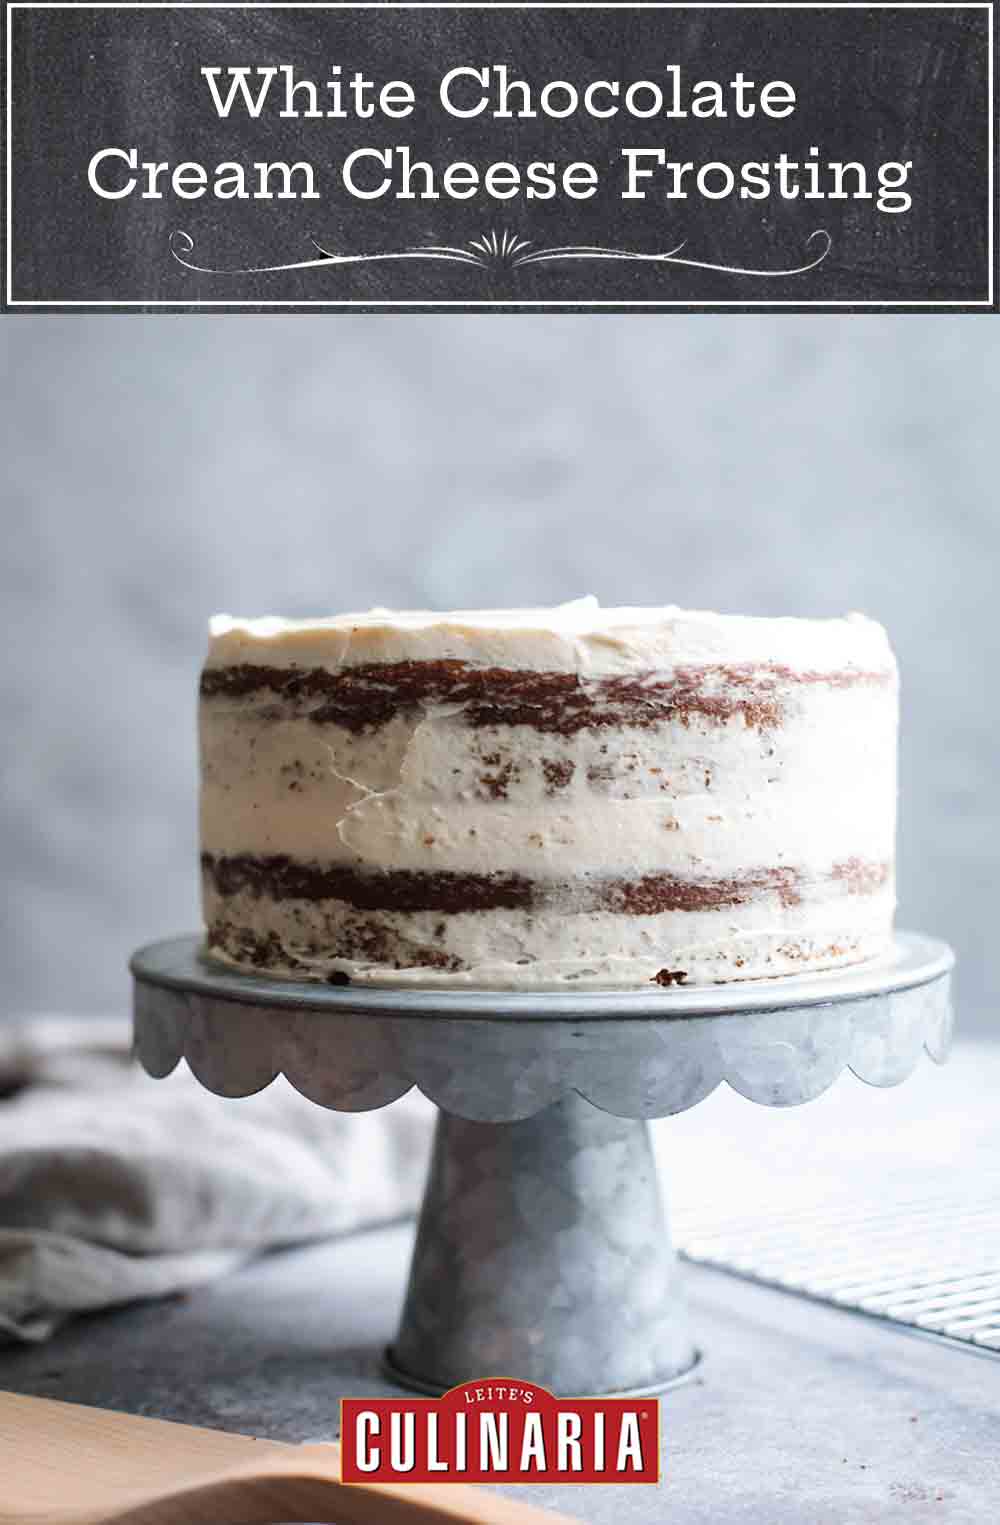 A double layer cake on a cake stand frosted in white chocolate-cream cheese frosting